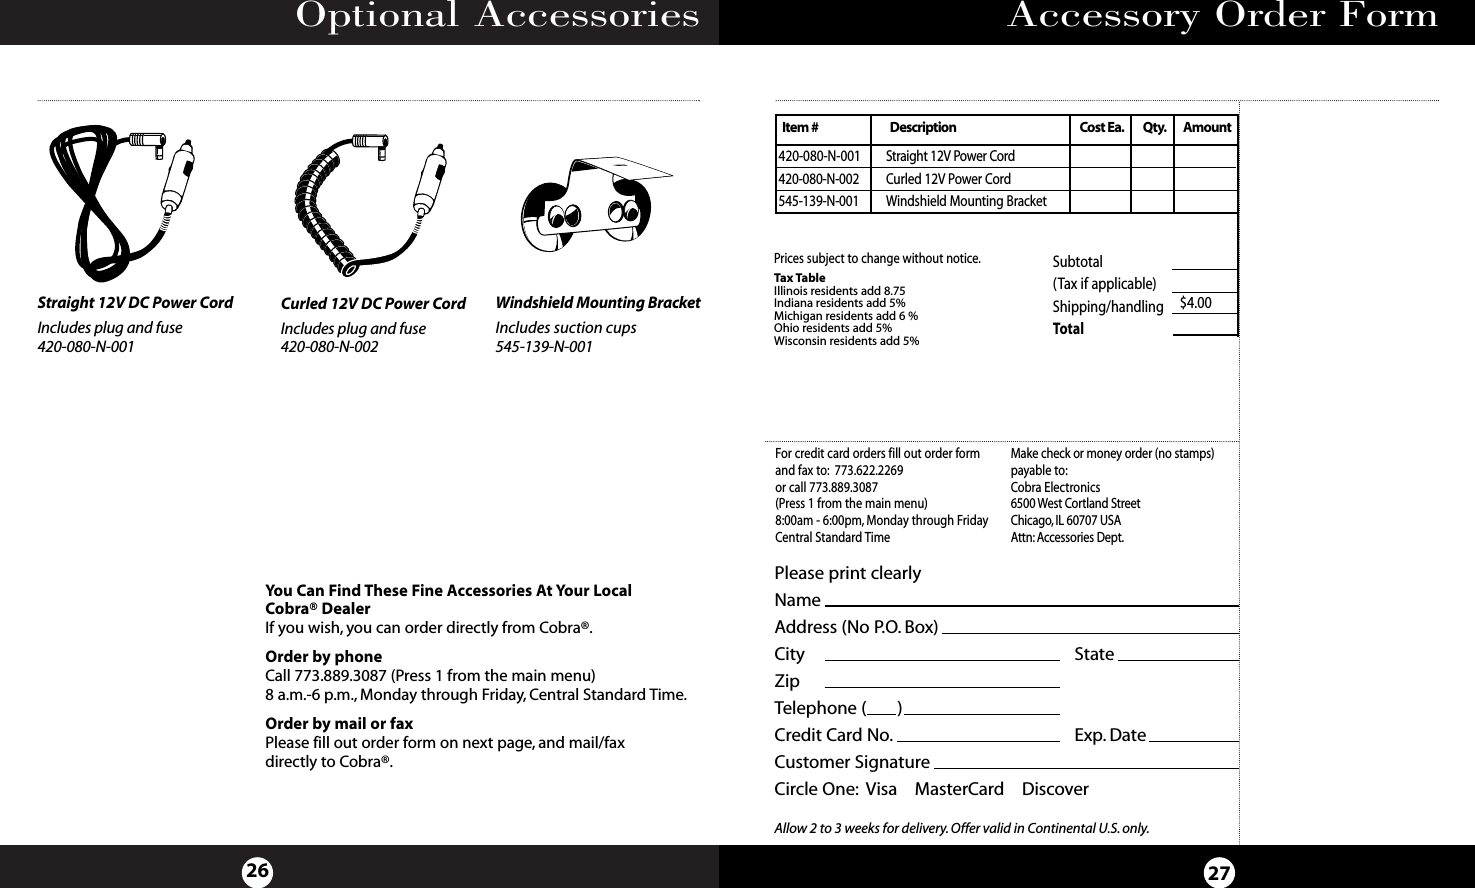 Optional Accessories26Accessory Order Form27You Can Find These Fine Accessories At Your LocalCobra® DealerIf you wish, you can order directly from Cobra®.Order by phoneCall 773.889.3087 (Press 1 from the main menu) 8 a.m.-6 p.m., Monday through Friday, Central Standard Time.Order by mail or faxPlease fill out order form on next page, and mail/fax directly to Cobra®.Windshield Mounting BracketIncludes suction cups545-139-N-001Straight 12V DC Power CordIncludes plug and fuse420-080-N-001Curled 12V DC Power CordIncludes plug and fuse420-080-N-002Subtotal(Tax if applicable)  Shipping/handling $4.00Total Tax TableIllinois residents add 8.75Indiana residents add 5%Michigan residents add 6 % Ohio residents add 5%Wisconsin residents add 5%Prices subject to change without notice.420-080-N-001 Straight 12V Power Cord420-080-N-002 Curled 12V Power Cord545-139-N-001 Windshield Mounting BracketItem # Description Cost Ea. Qty. AmountPlease print clearlyNameAddress (No P.O. Box)City                       StateZipTelephone (       )Credit Card No. Exp. DateCustomer SignatureCircle One: Visa    MasterCard    DiscoverAllow 2 to 3 weeks for delivery.Offer valid in Continental U.S.only.For credit card orders fill out order formand fax to: 773.622.2269or call 773.889.3087(Press 1 from the main menu)8:00am - 6:00pm, Monday through FridayCentral Standard TimeMake check or money order (no stamps)payable to:Cobra Electronics6500 West Cortland StreetChicago, IL 60707 USAAttn: Accessories Dept.